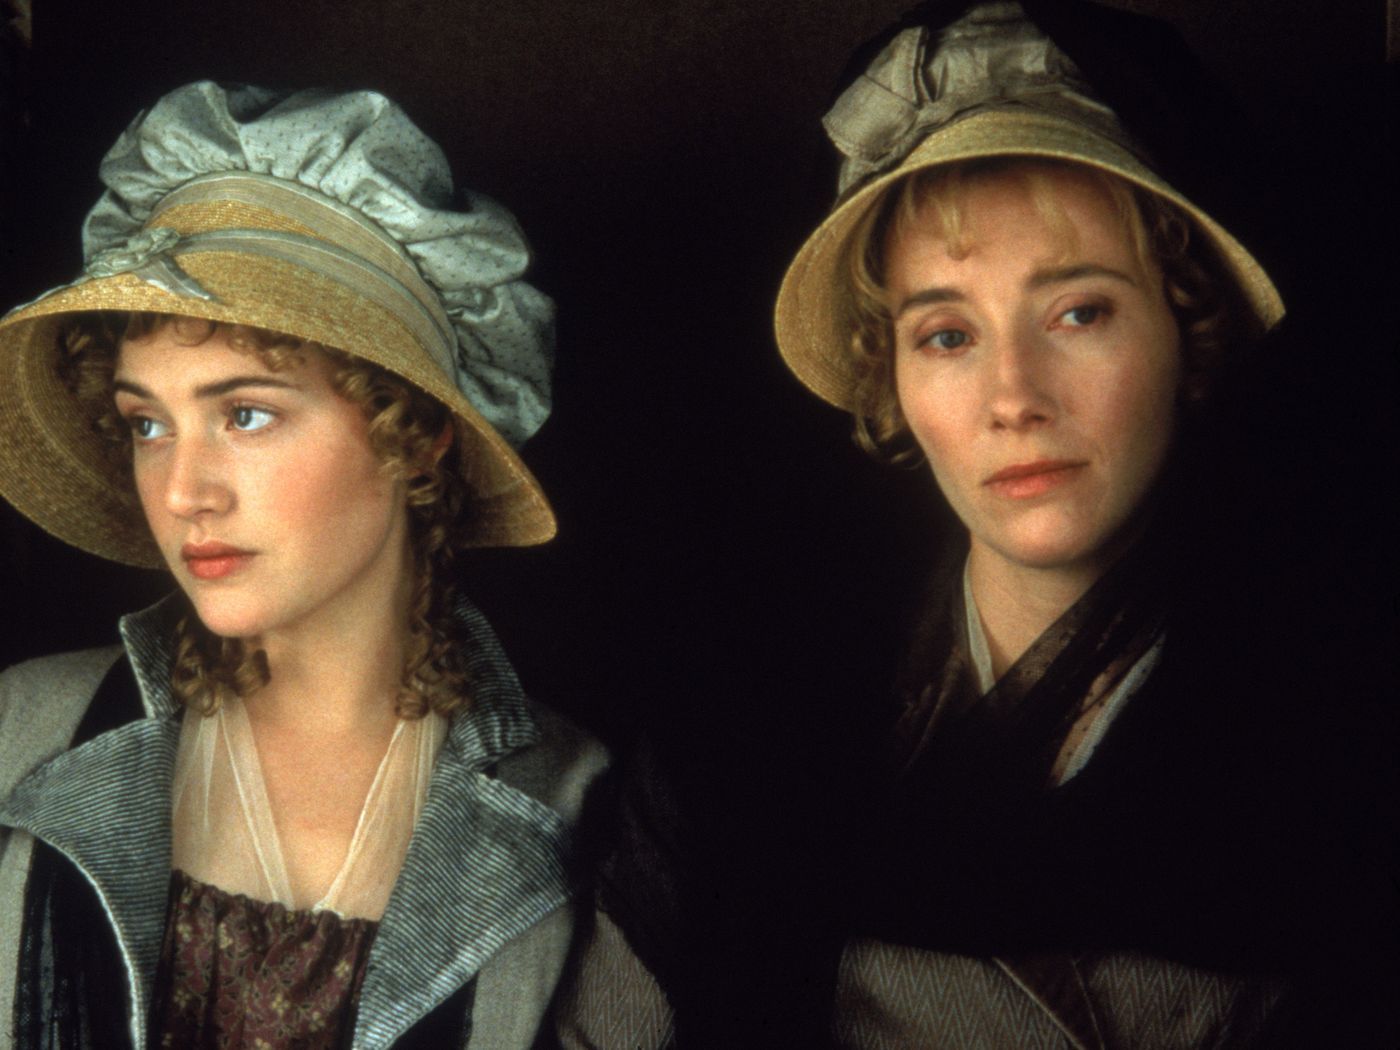 years after Jane Austen died, the 1995 film Sense and Sensibility still sparkles